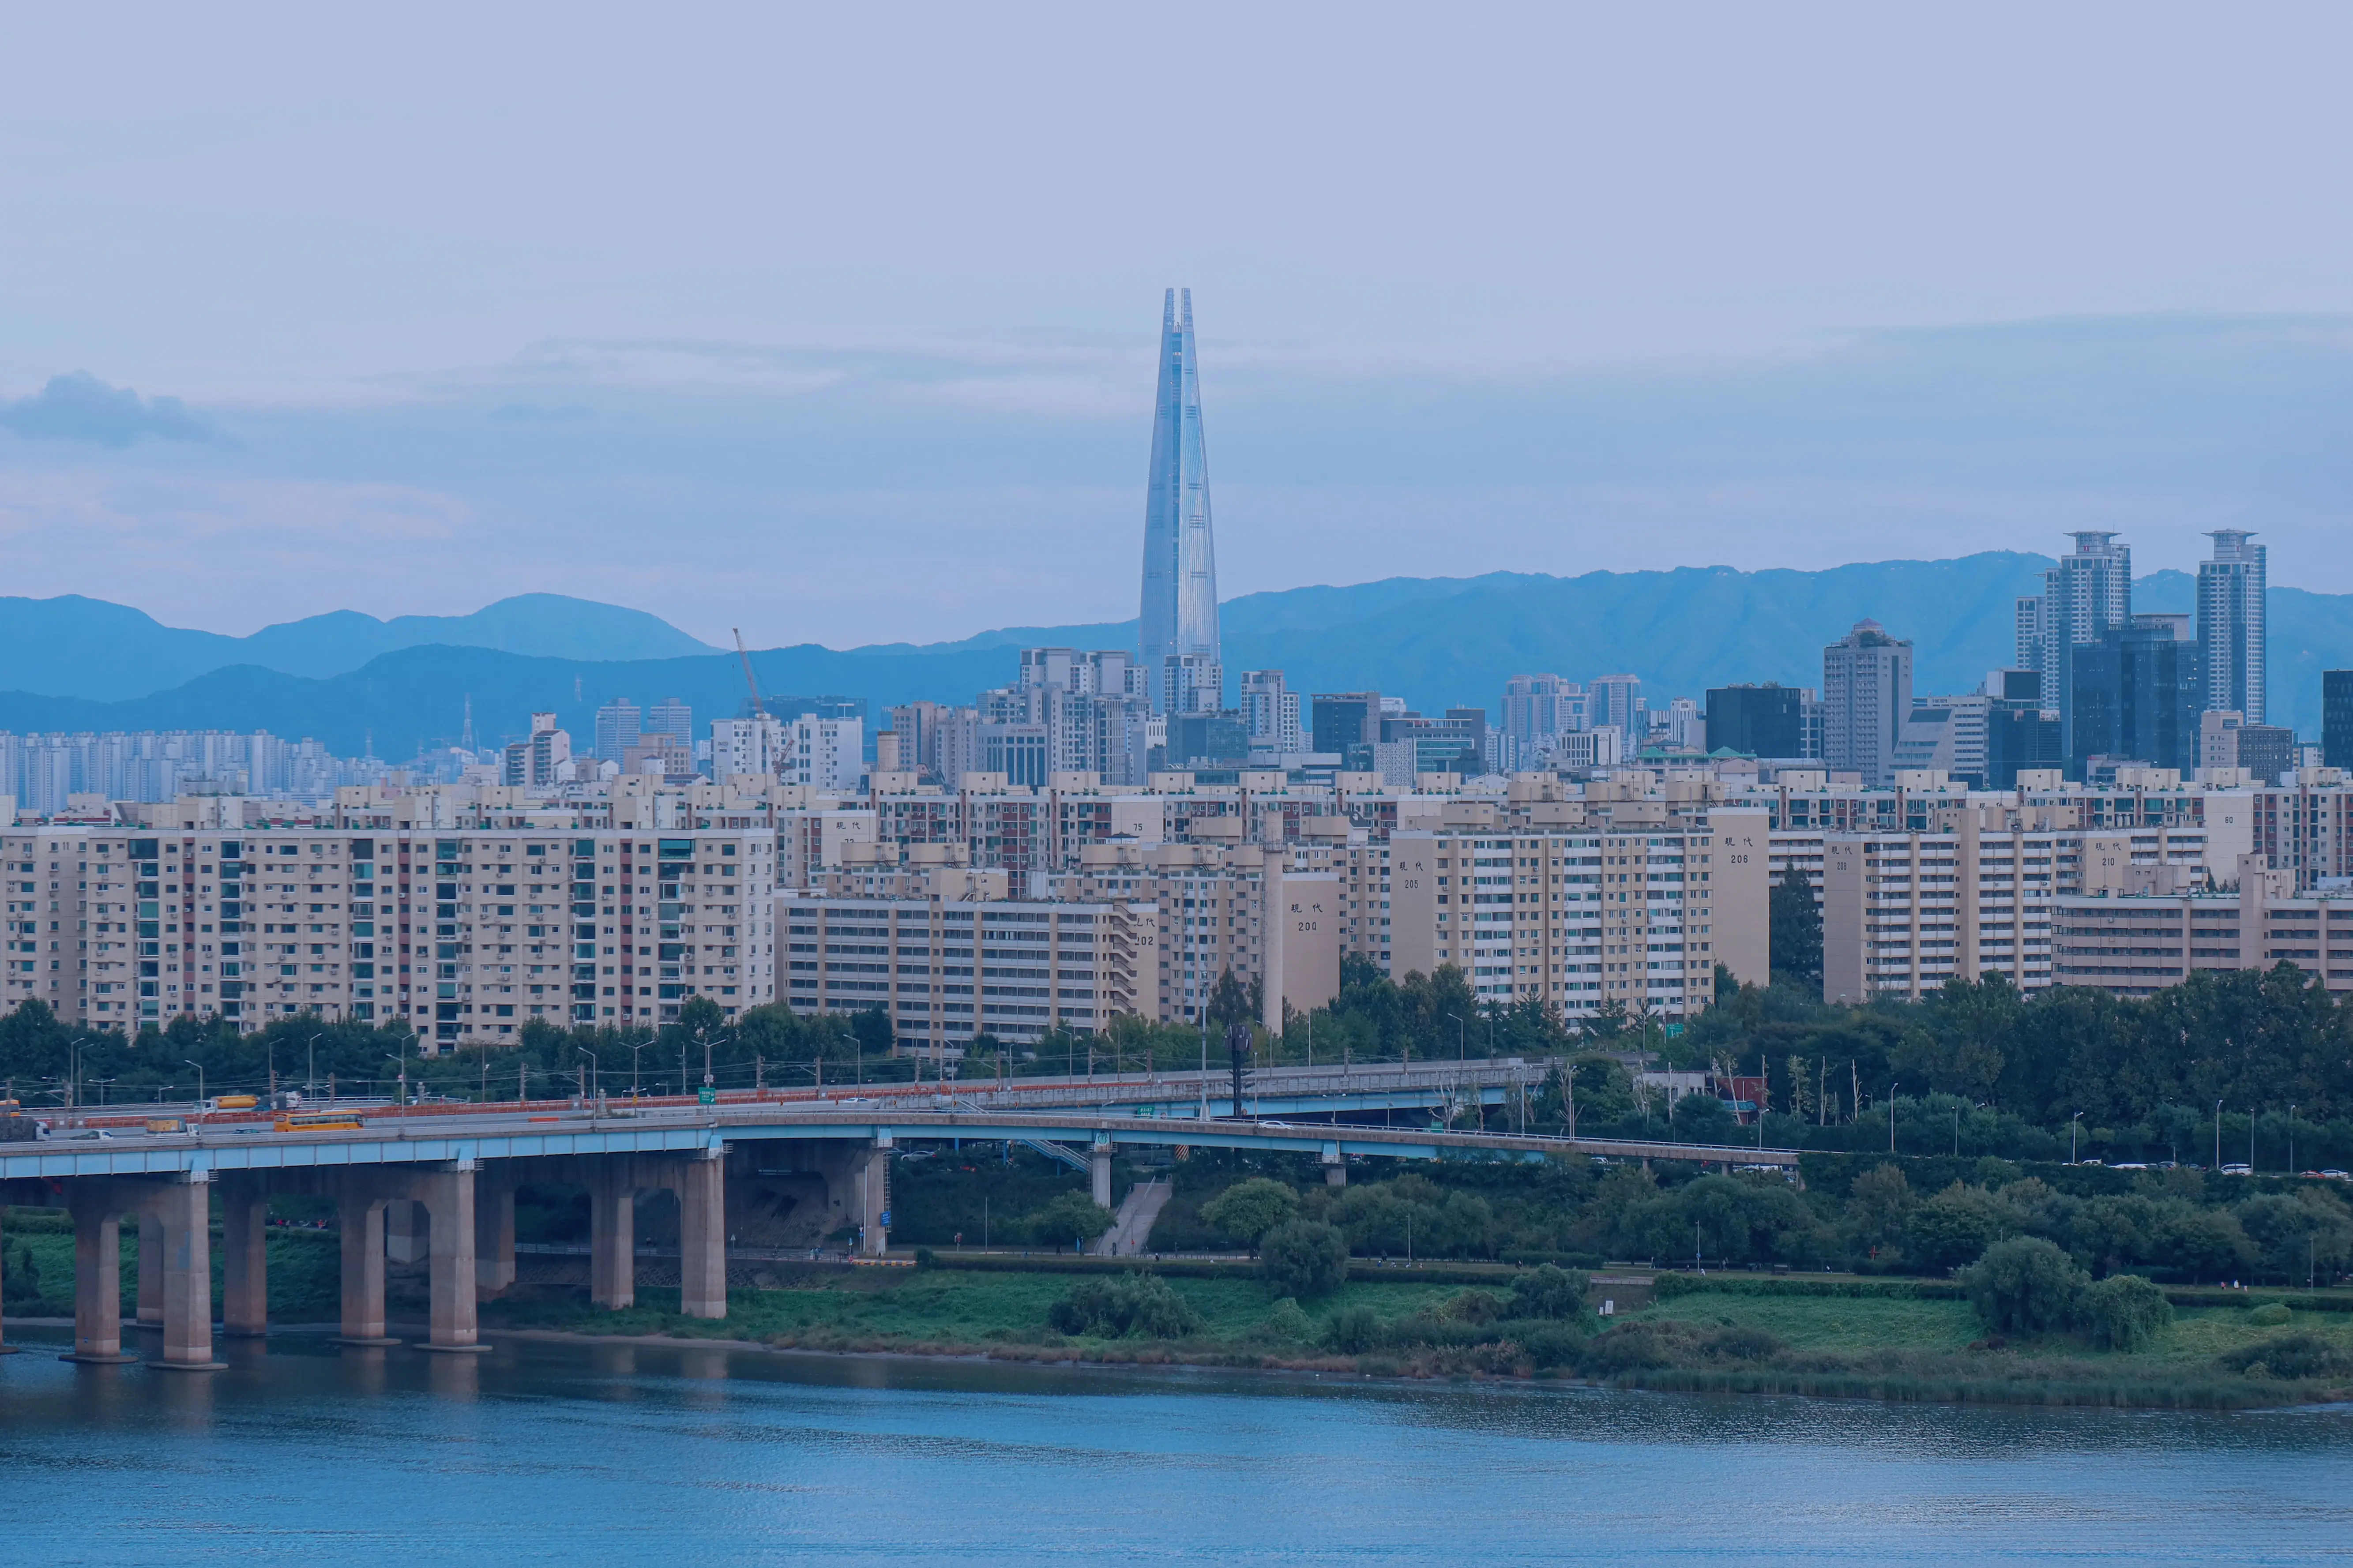 Visit Lotte World Tower in Seoul, South Korea